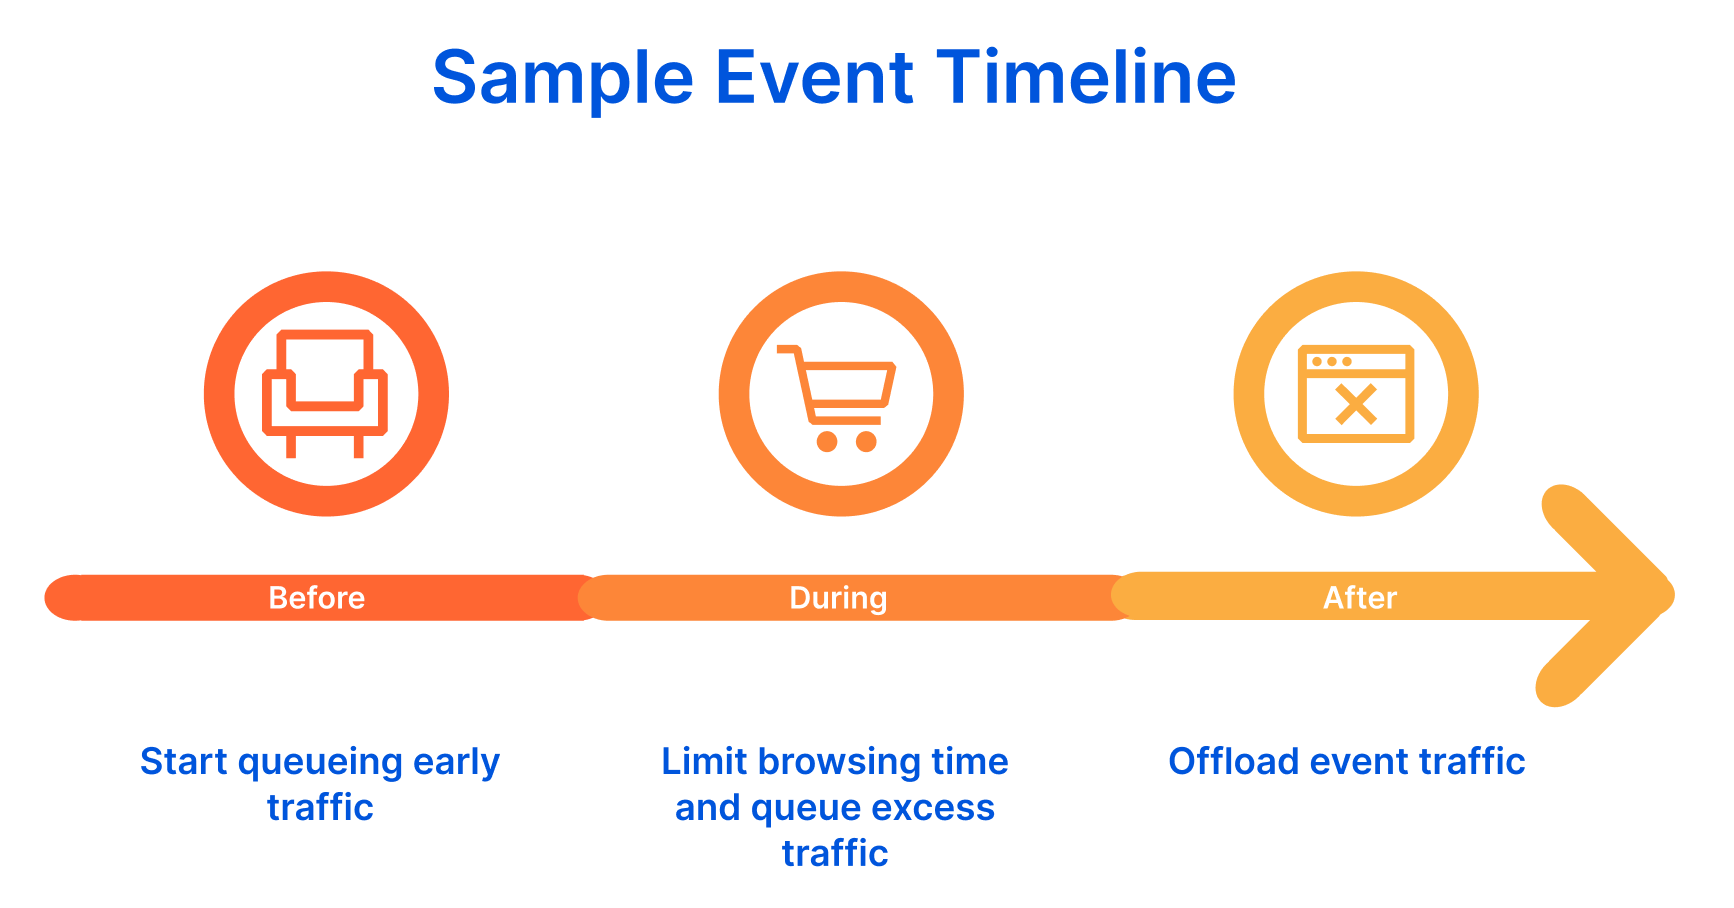 Sample timeline of an online event’s Waiting Room requirements.